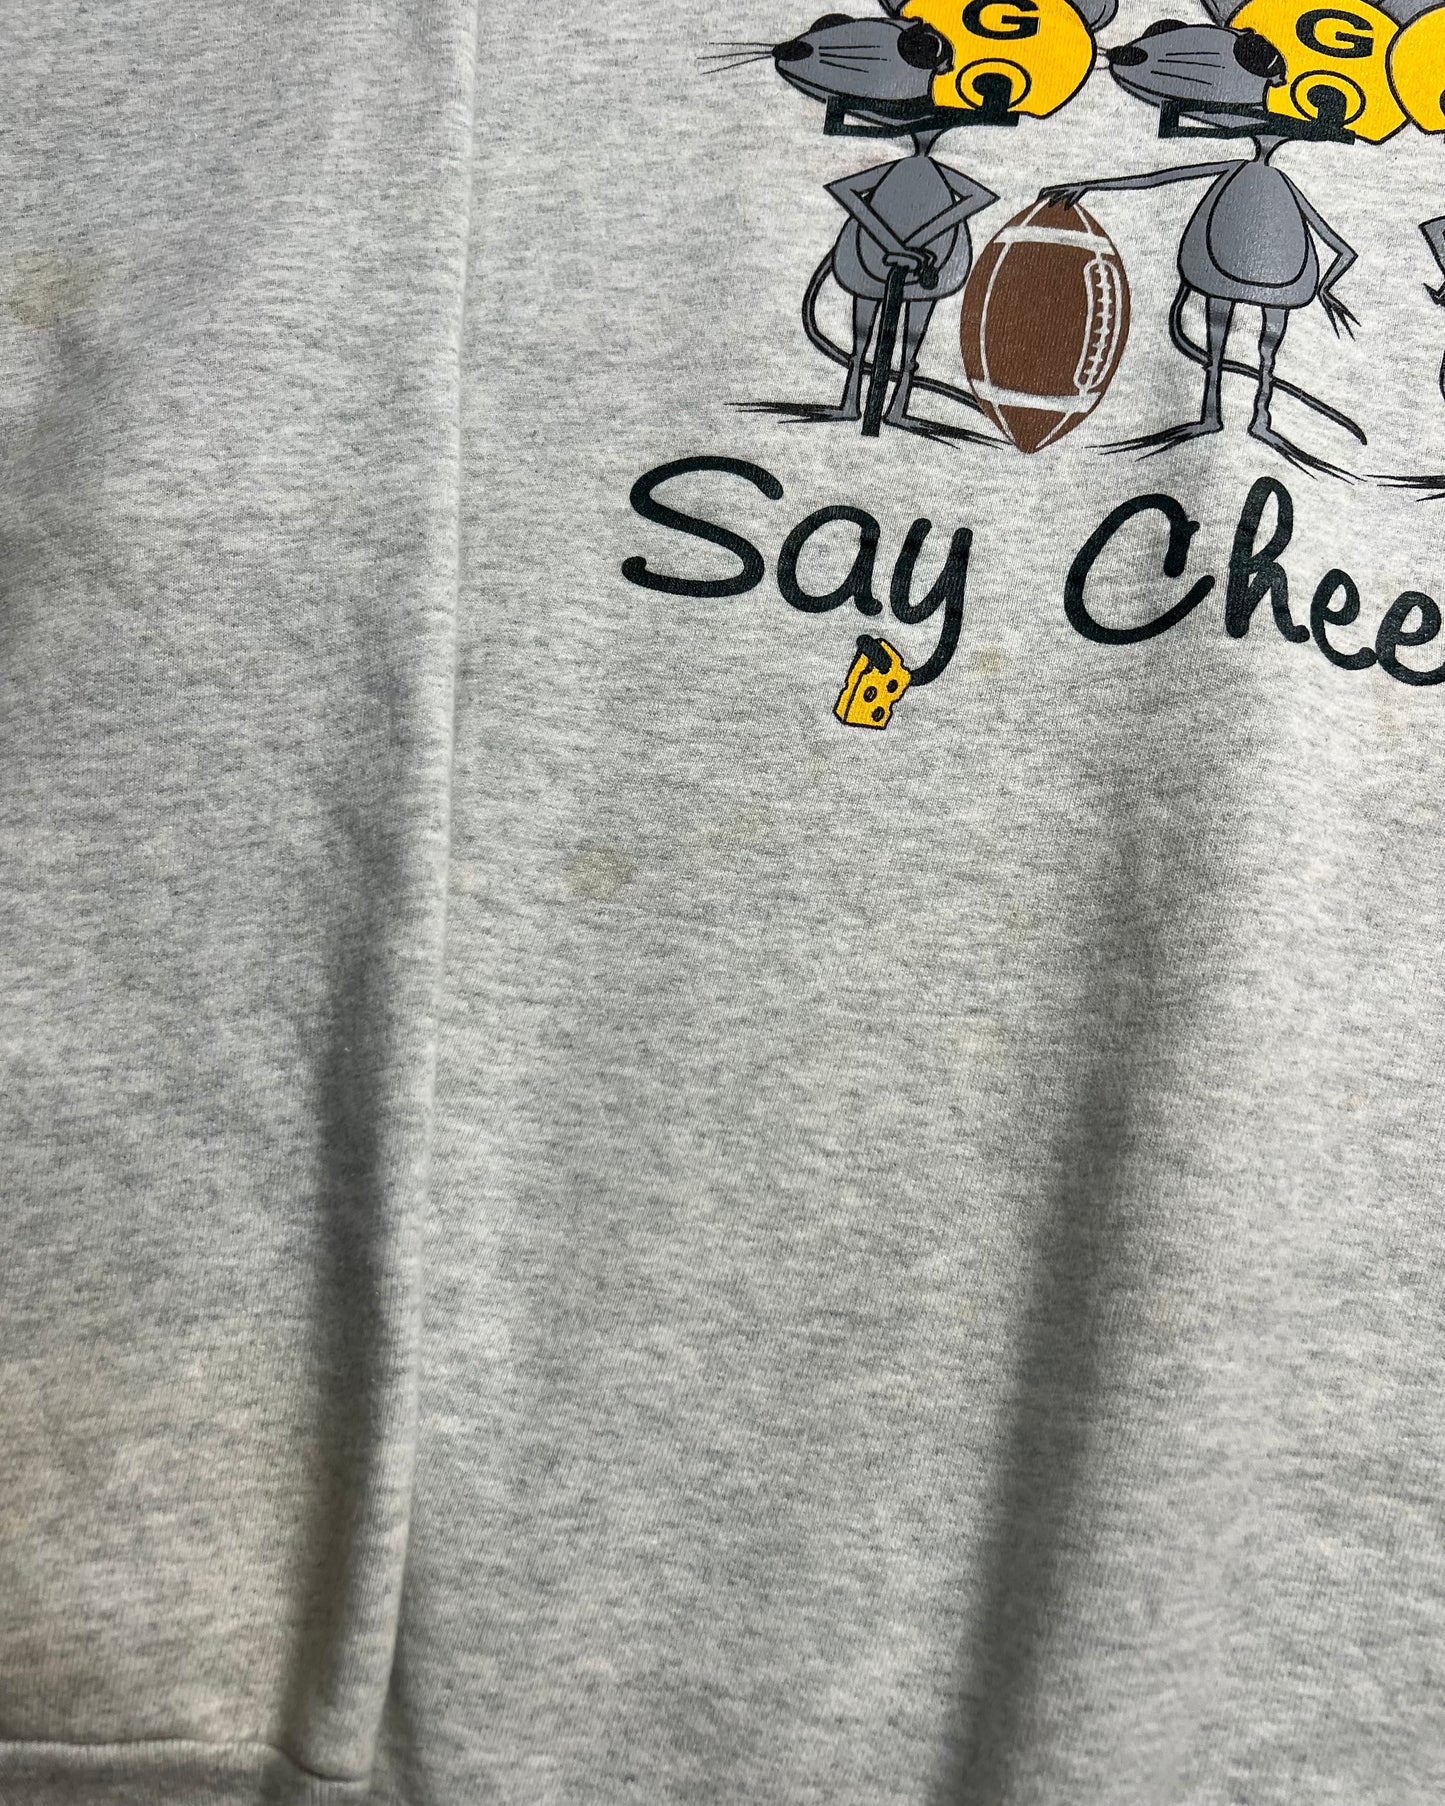 1990's Green Bay Packers "Say Cheese" Fruit of the Loom Crewneck